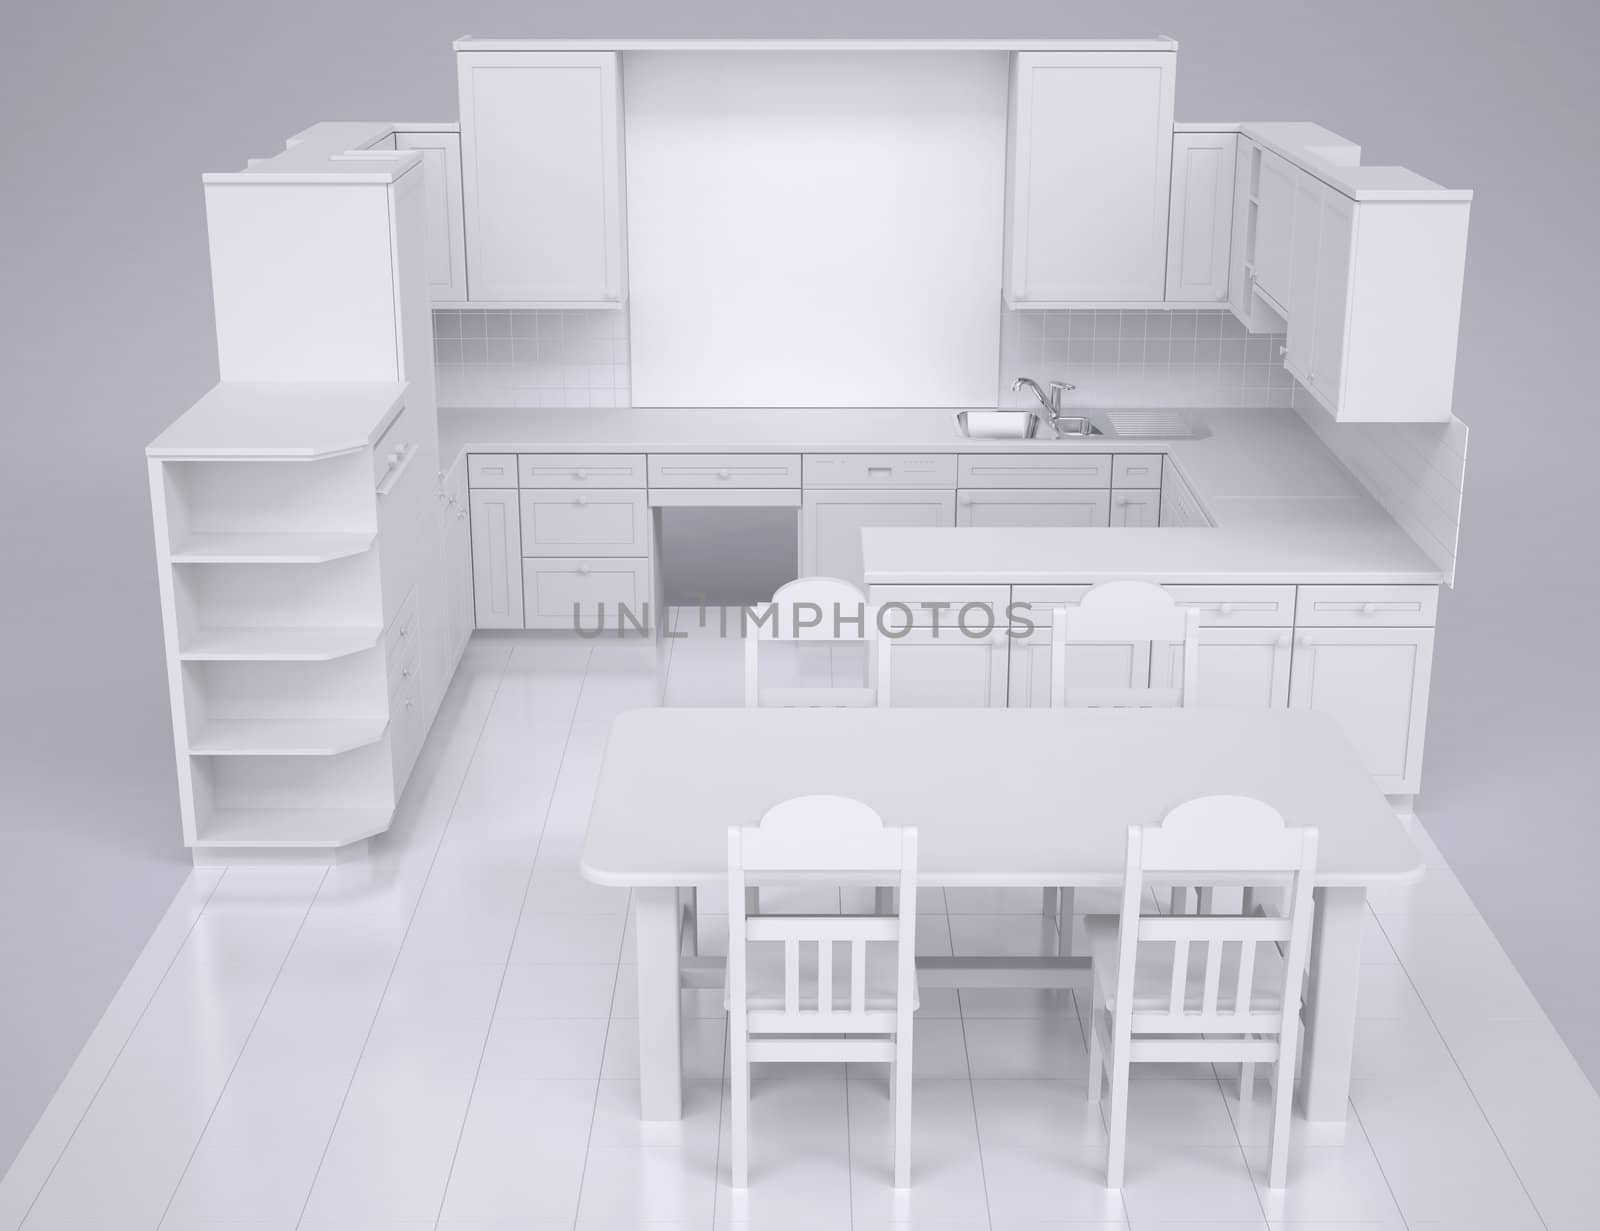 White kitchen. Render in the studio on a gray background